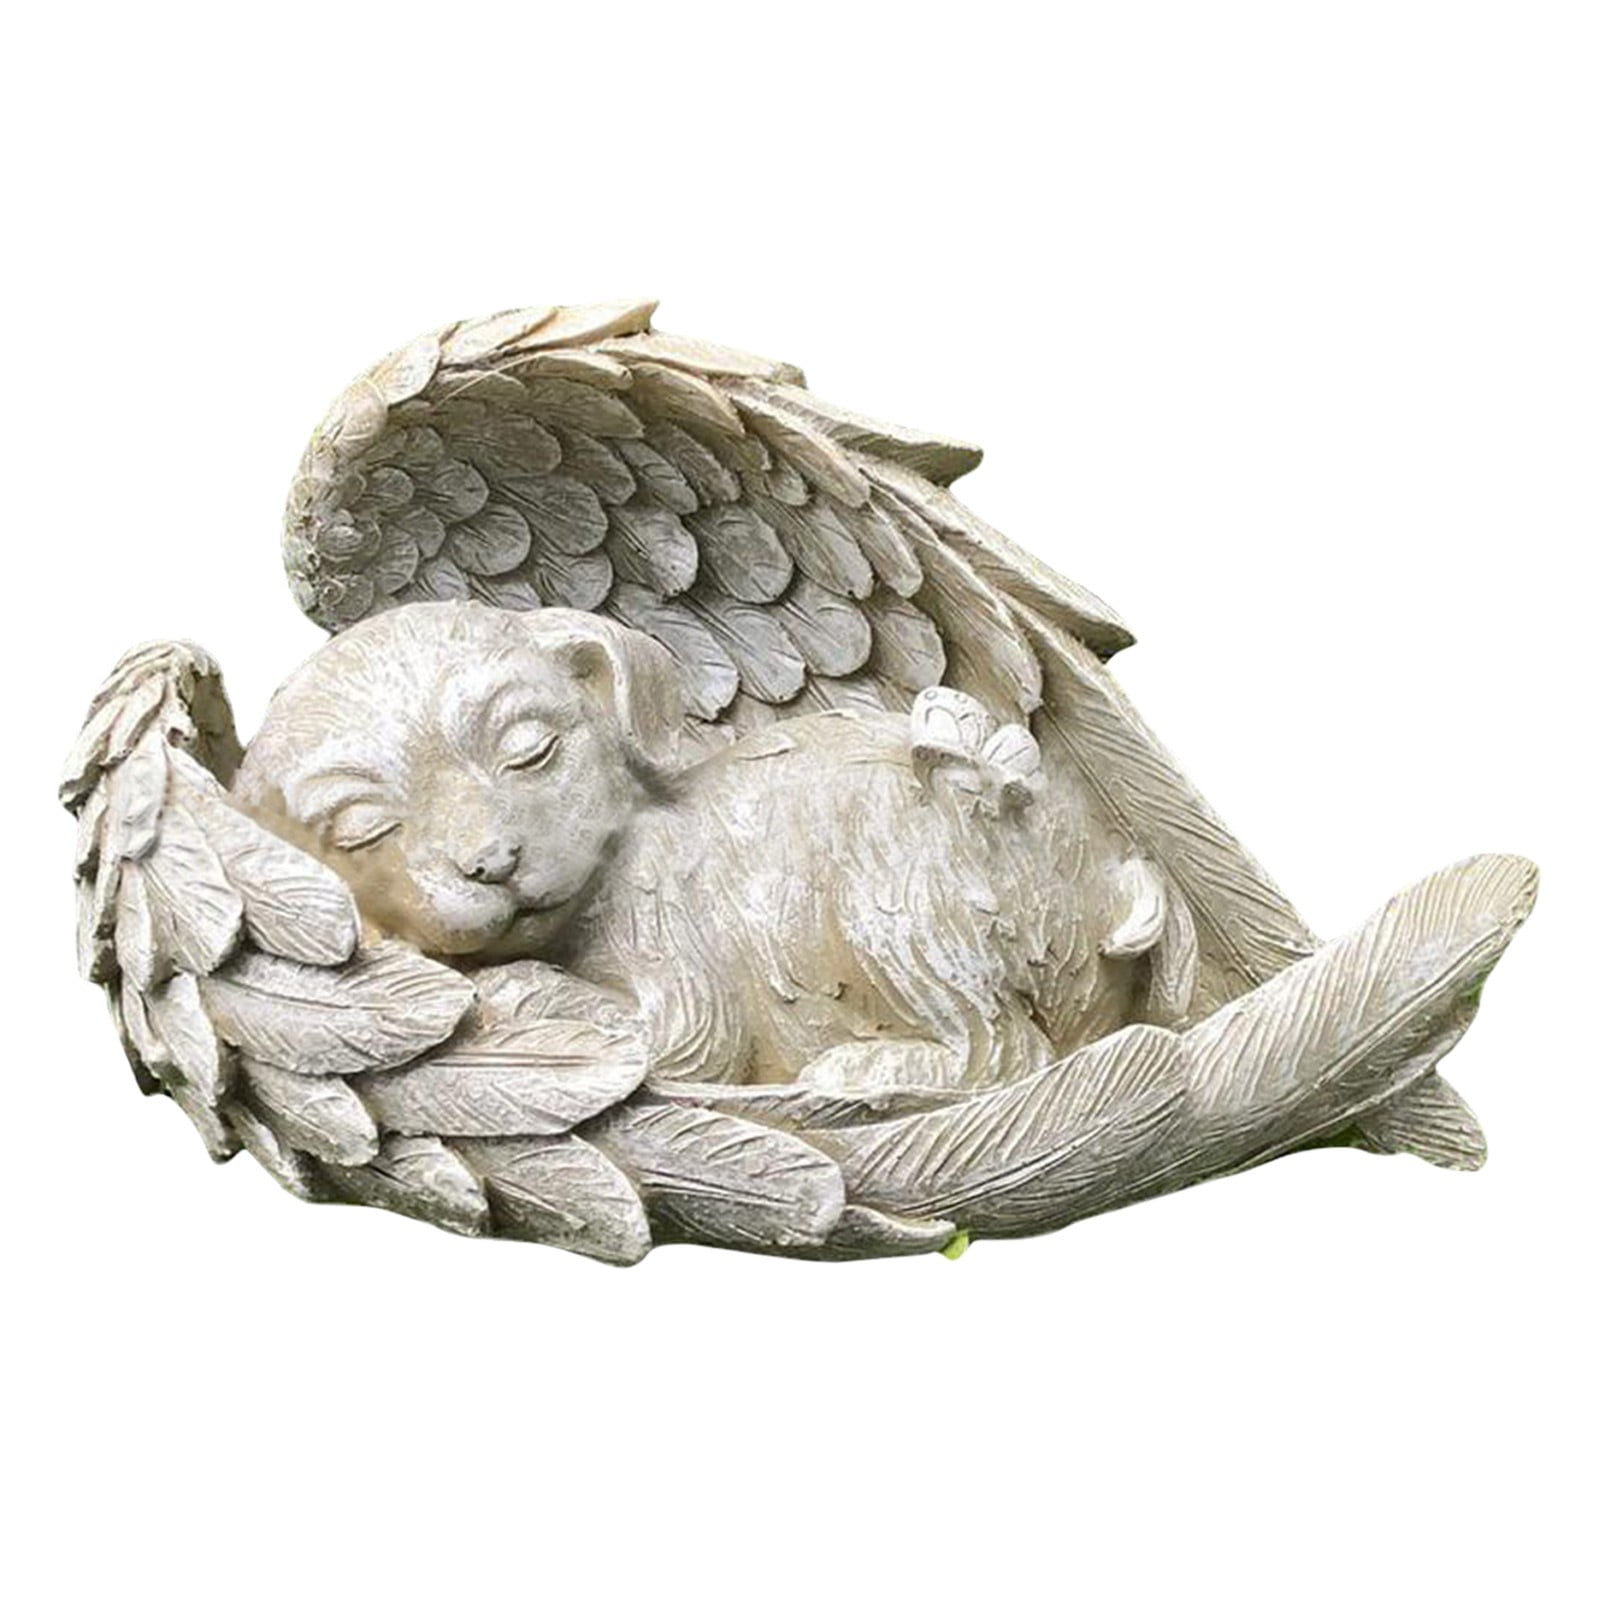 Resin Garden Dog Ornament Fadeless Sleep Angel Dog Realistic Pet Memorial Grave Marker Uv-resistant Angel Pet Sculpture Resin Memorial Dog Decoration With Angel Wing